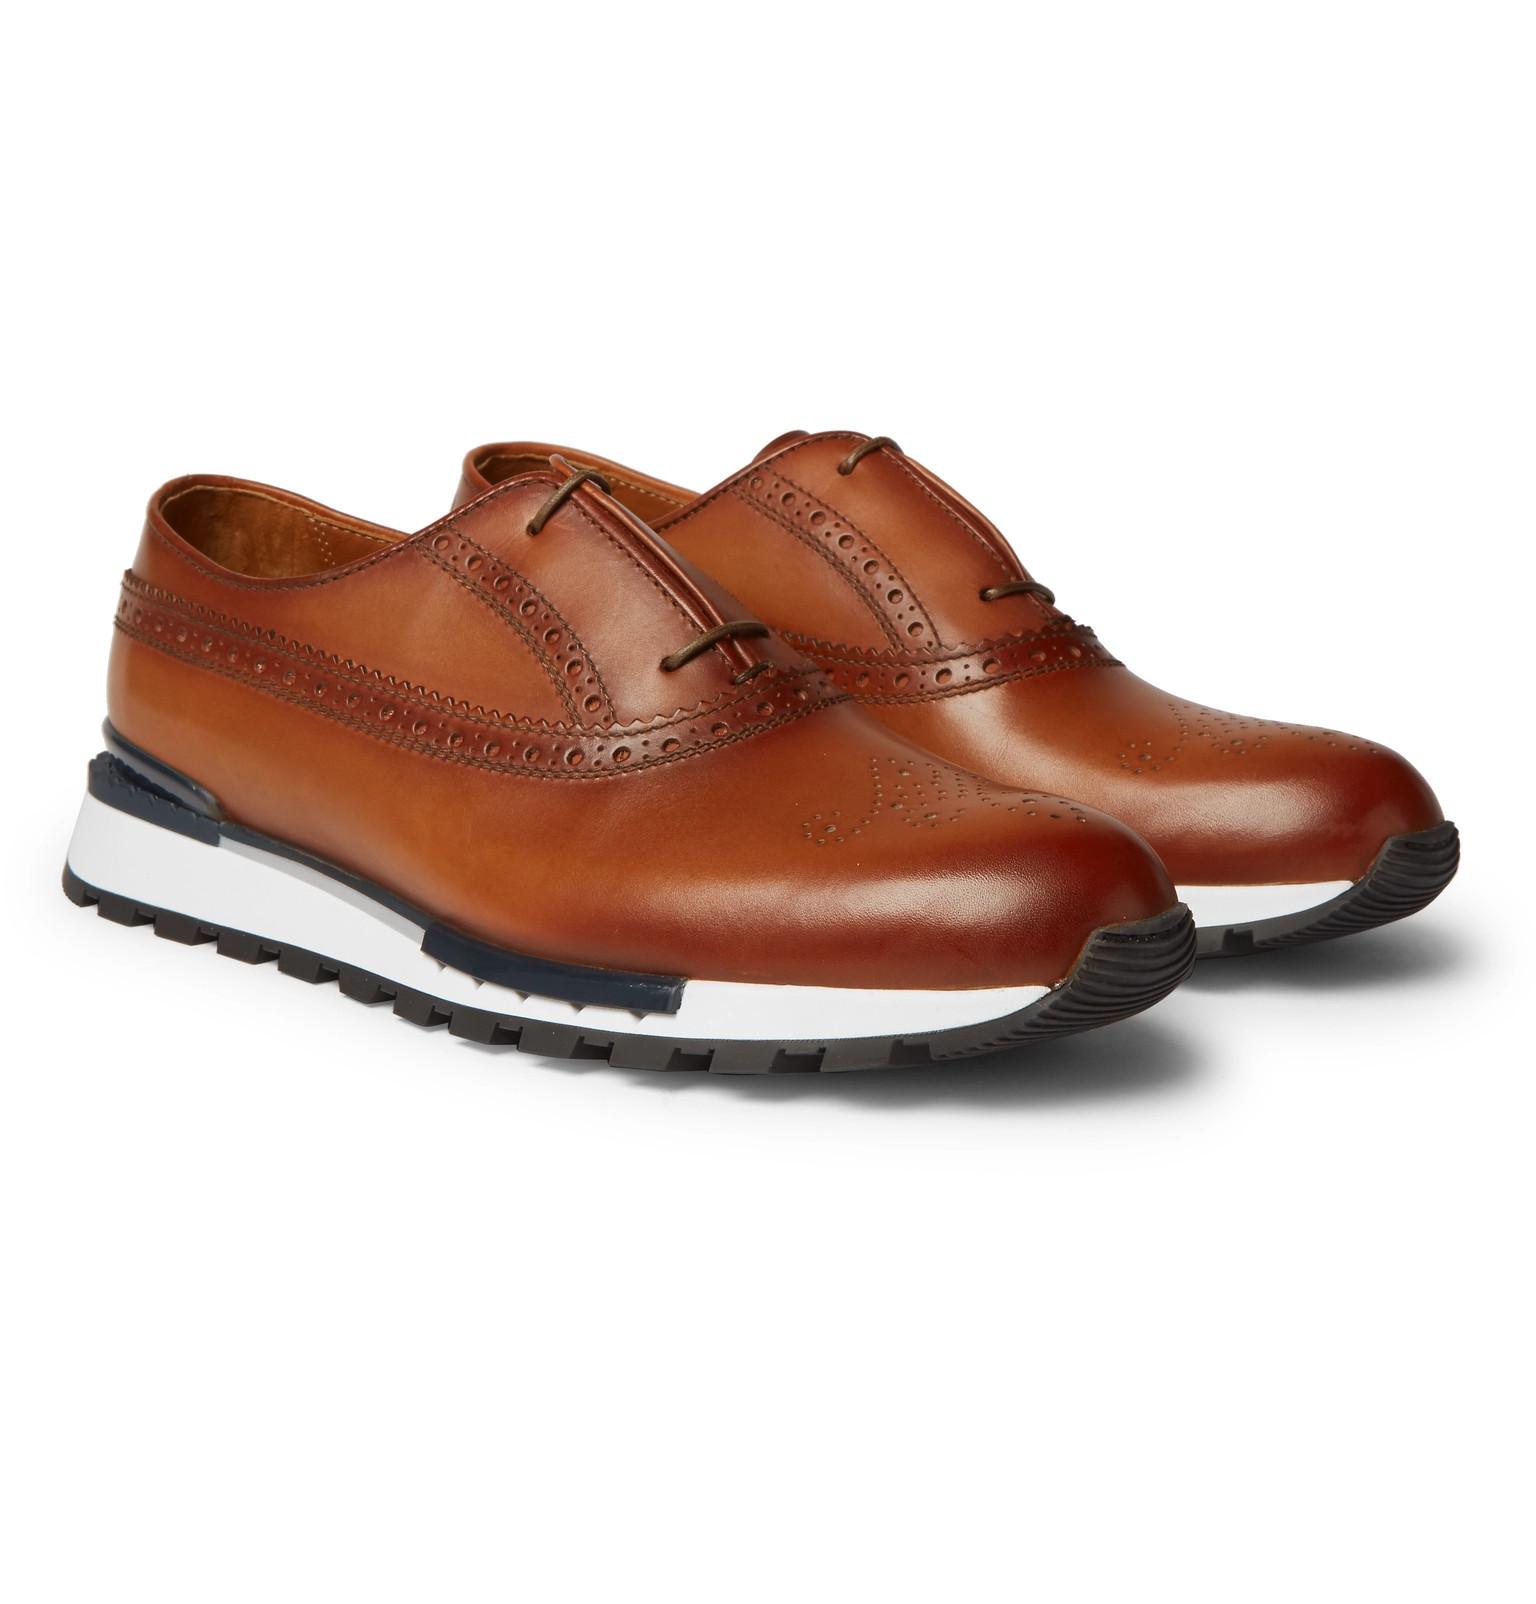 Berluti Fast Track Leather Brogue Sneakers in Brown for Men - Lyst